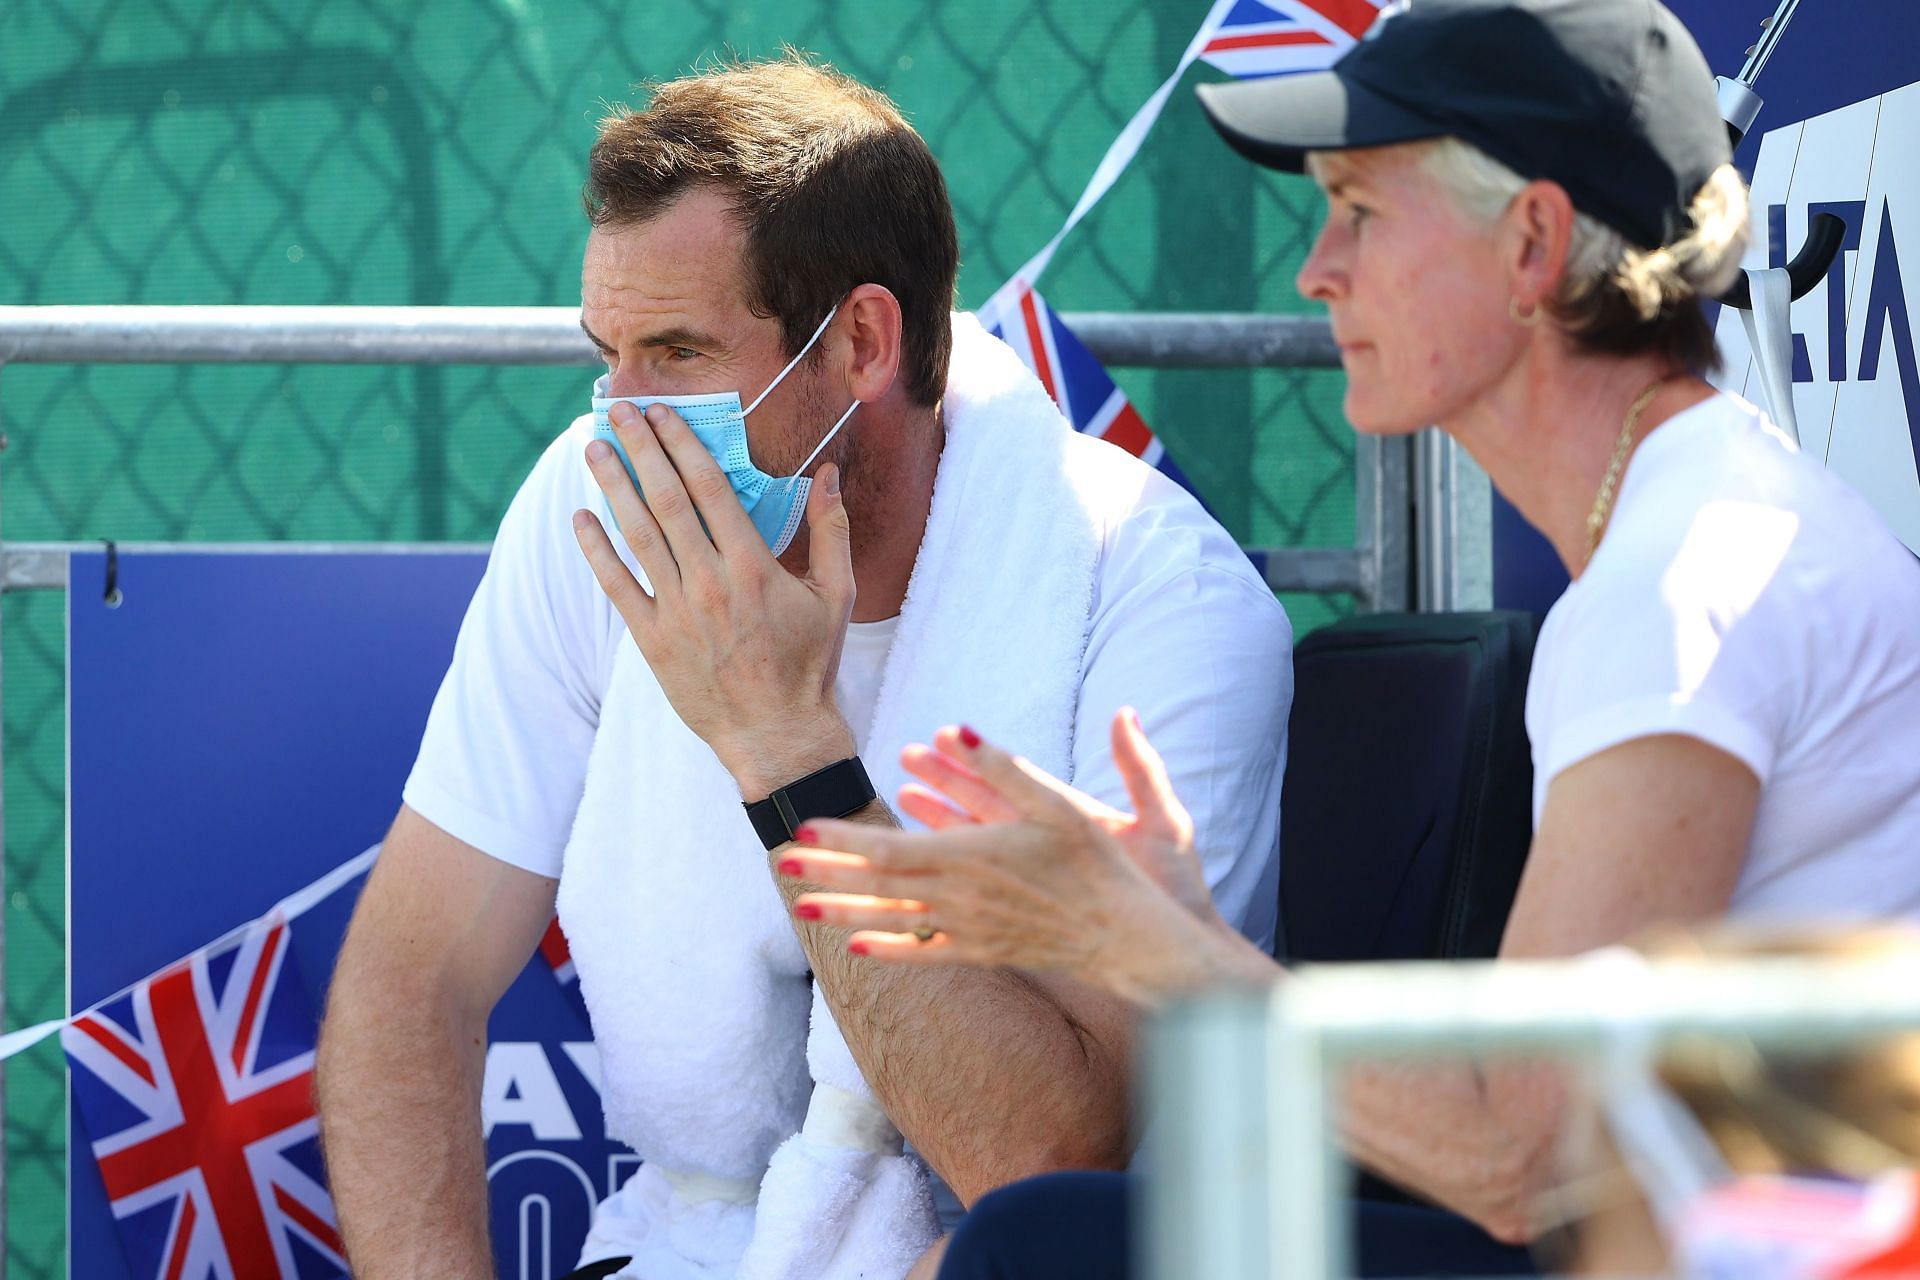 Andy Murray's mother Judy reacts to Brit imitating Batman by donning a mask during fun challenge ahead of Dubai 1R clash 